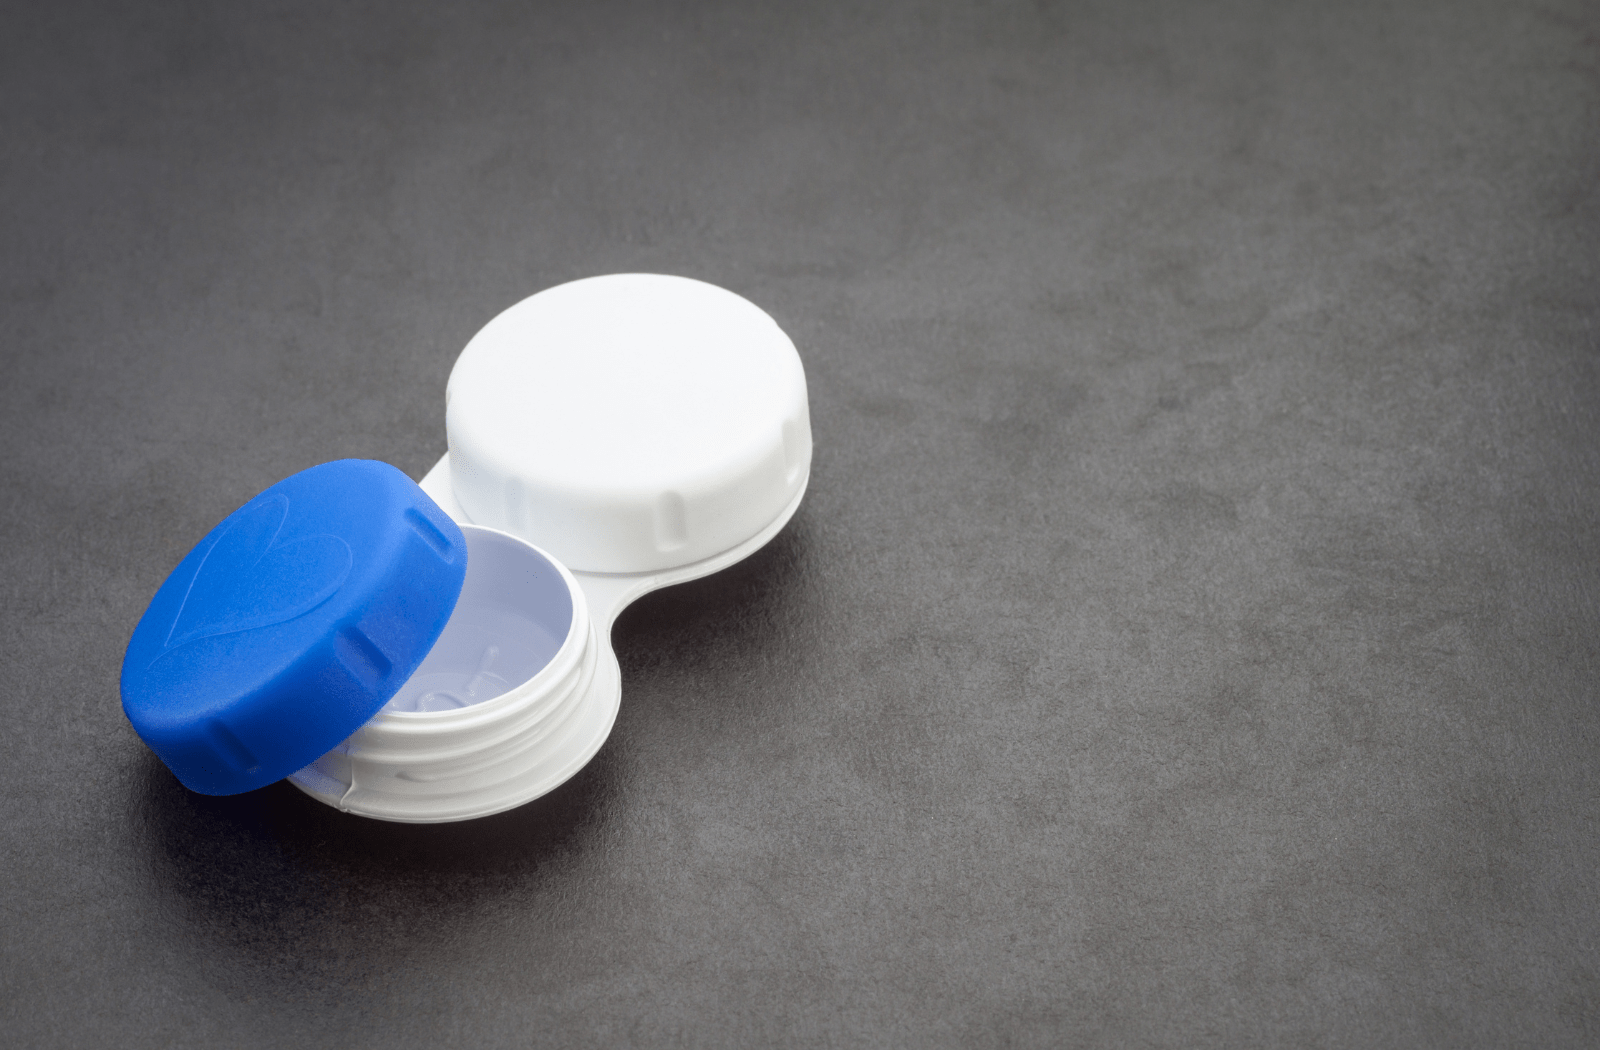 A pair of contact lenses sitting inside of a contact lens case that's white and blue